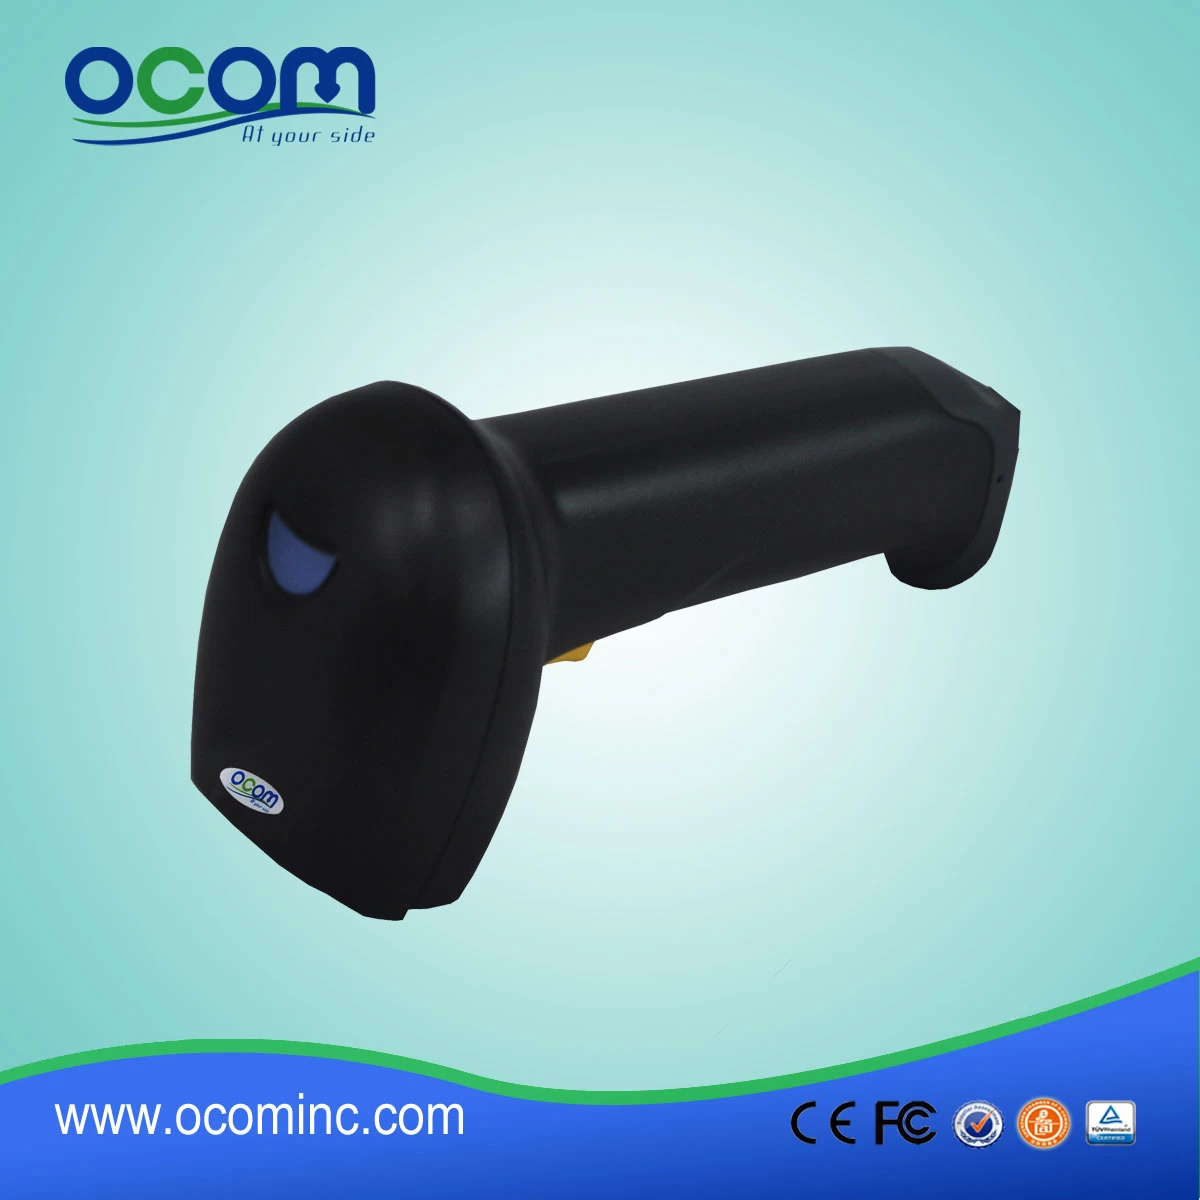 China made hot selling handheld laser barcode scanner-OCBS-L006